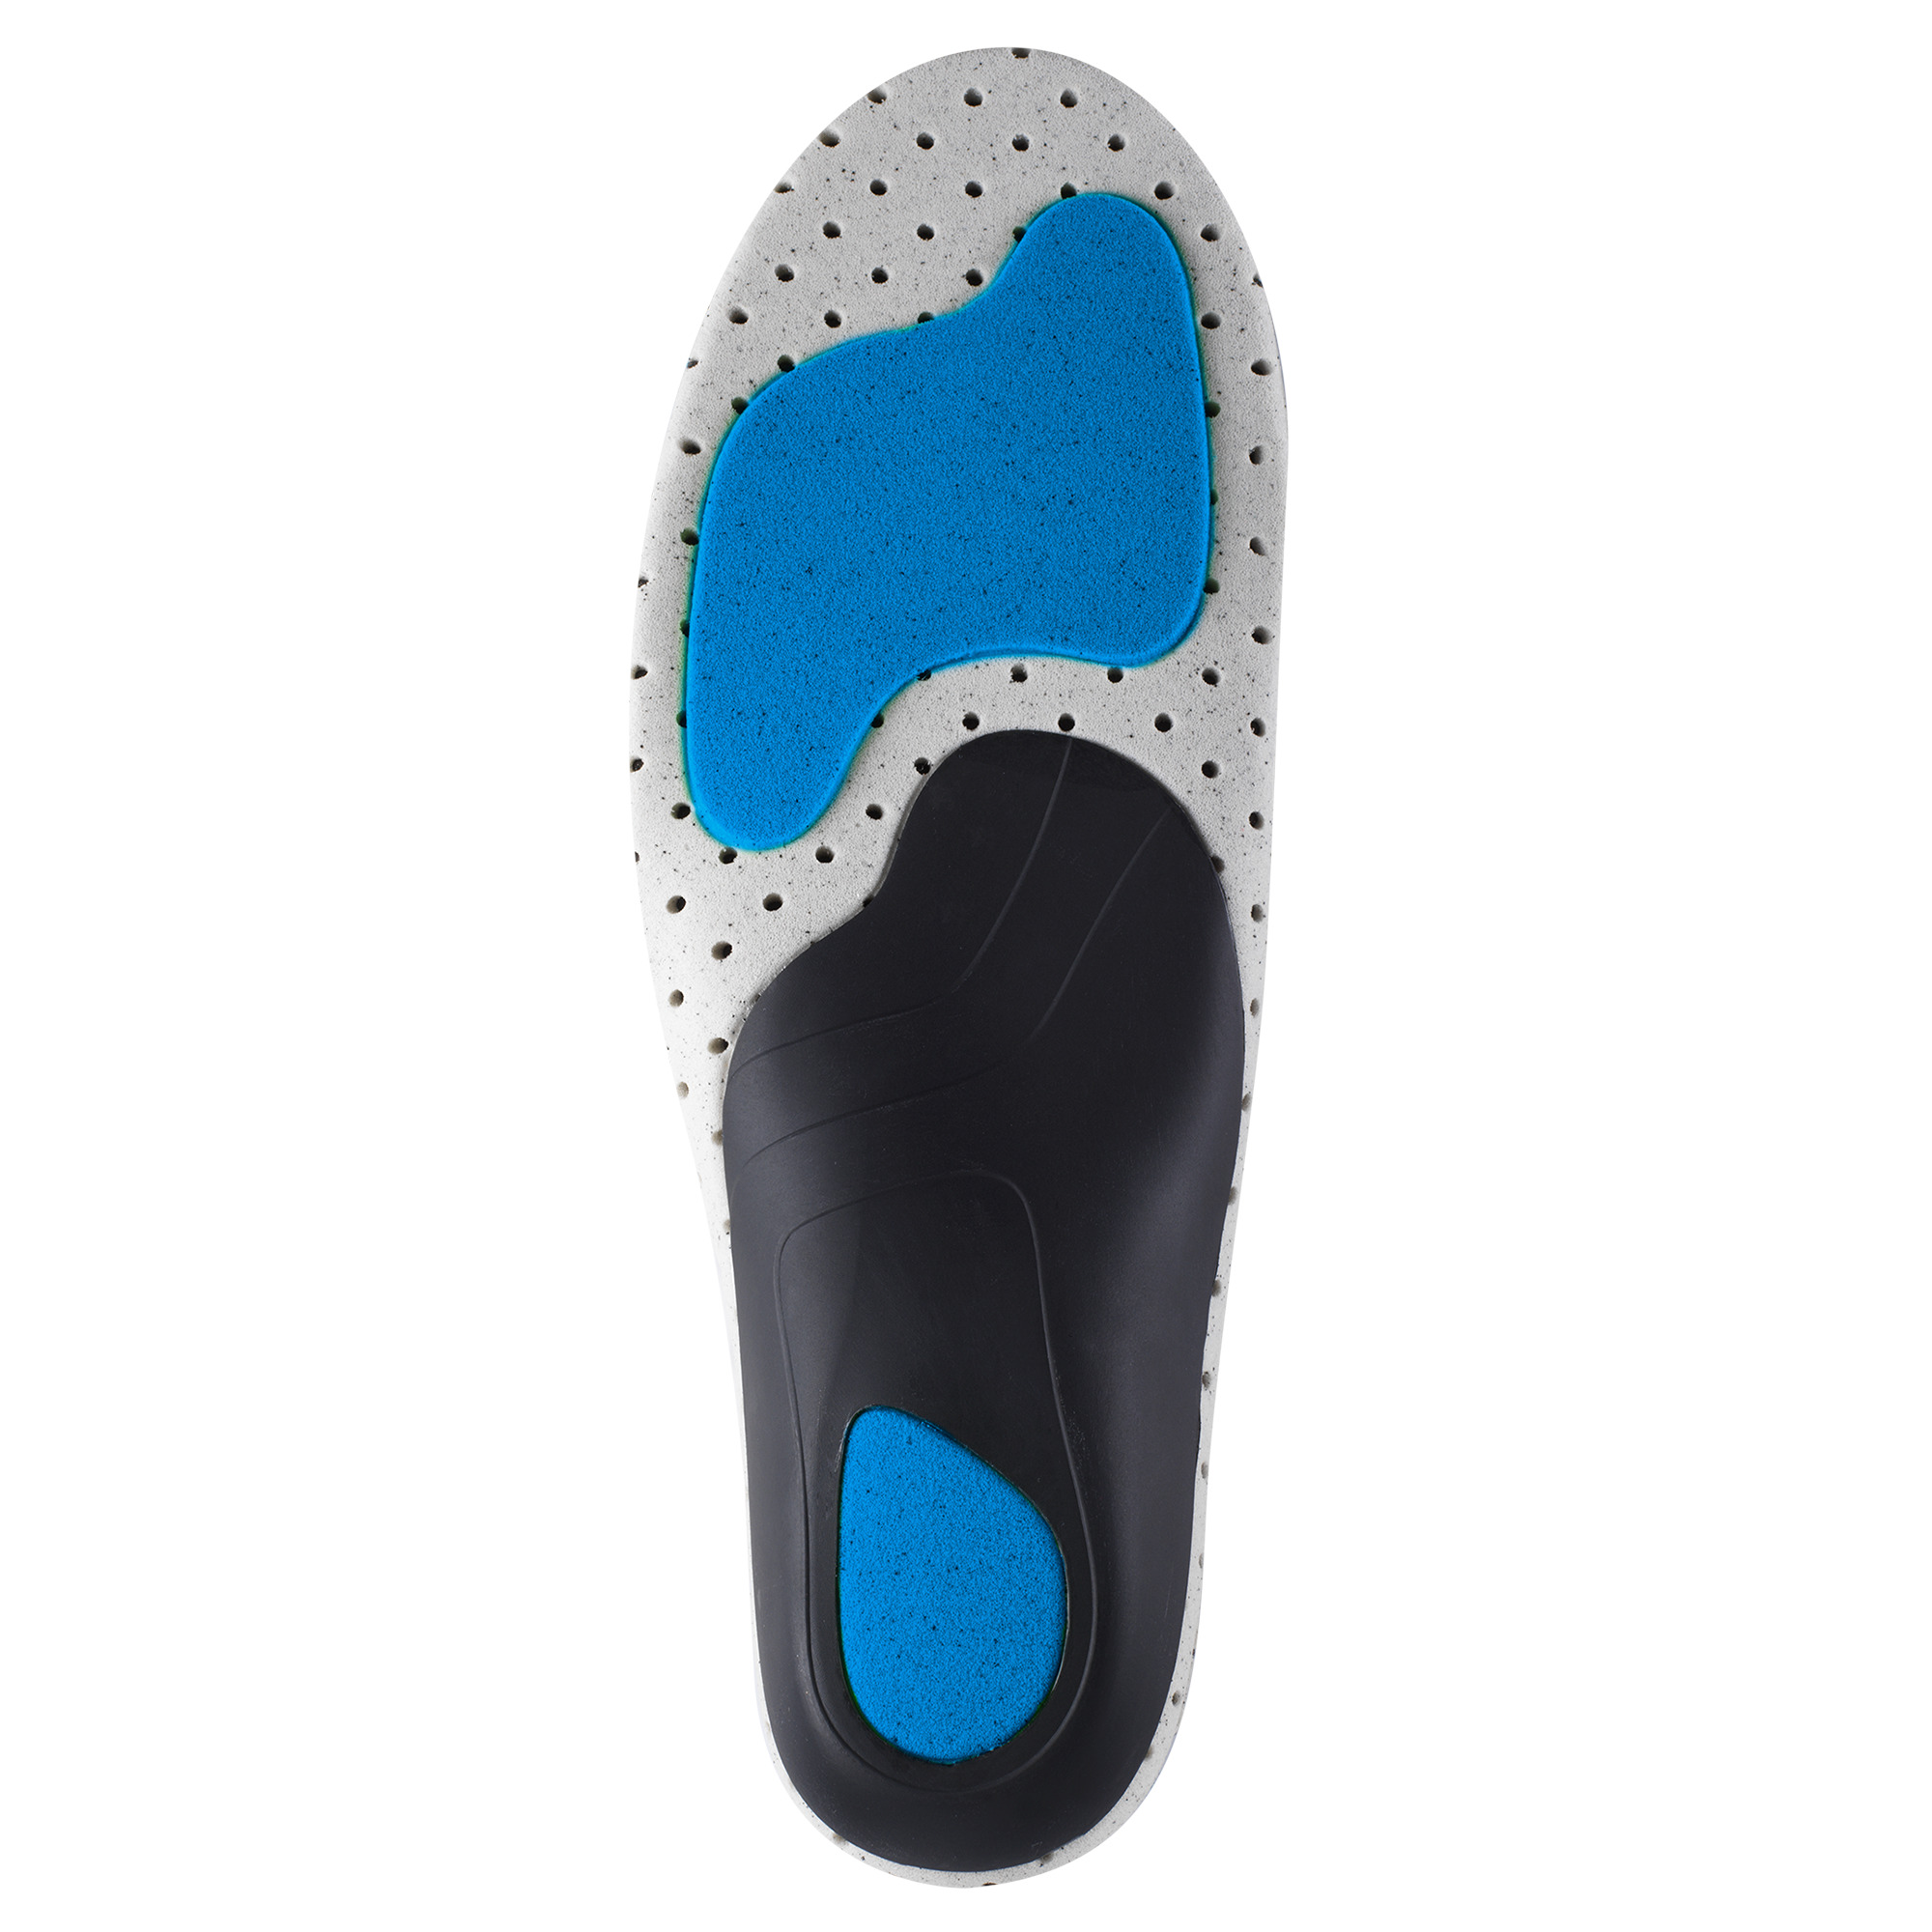 FITNESS Mid Arch insoles